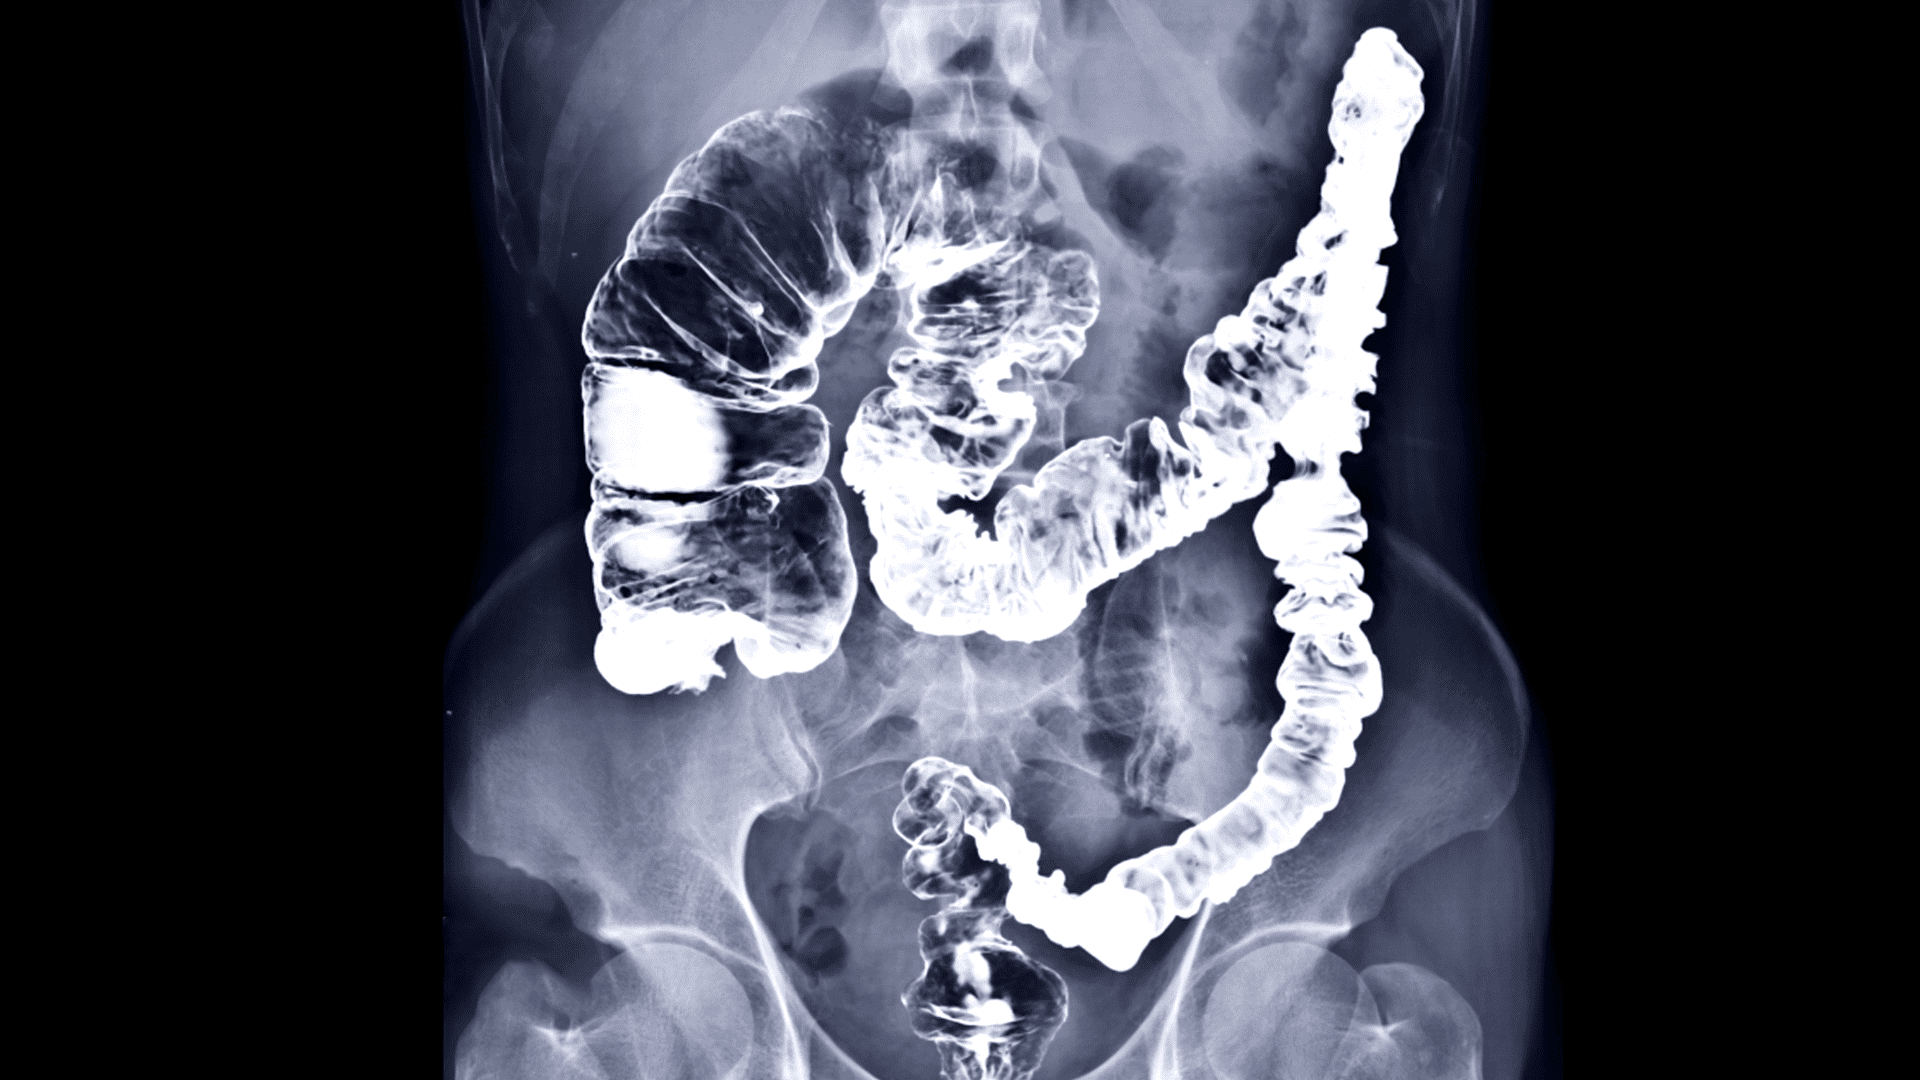 Featured image for “Colorectal Cancer”